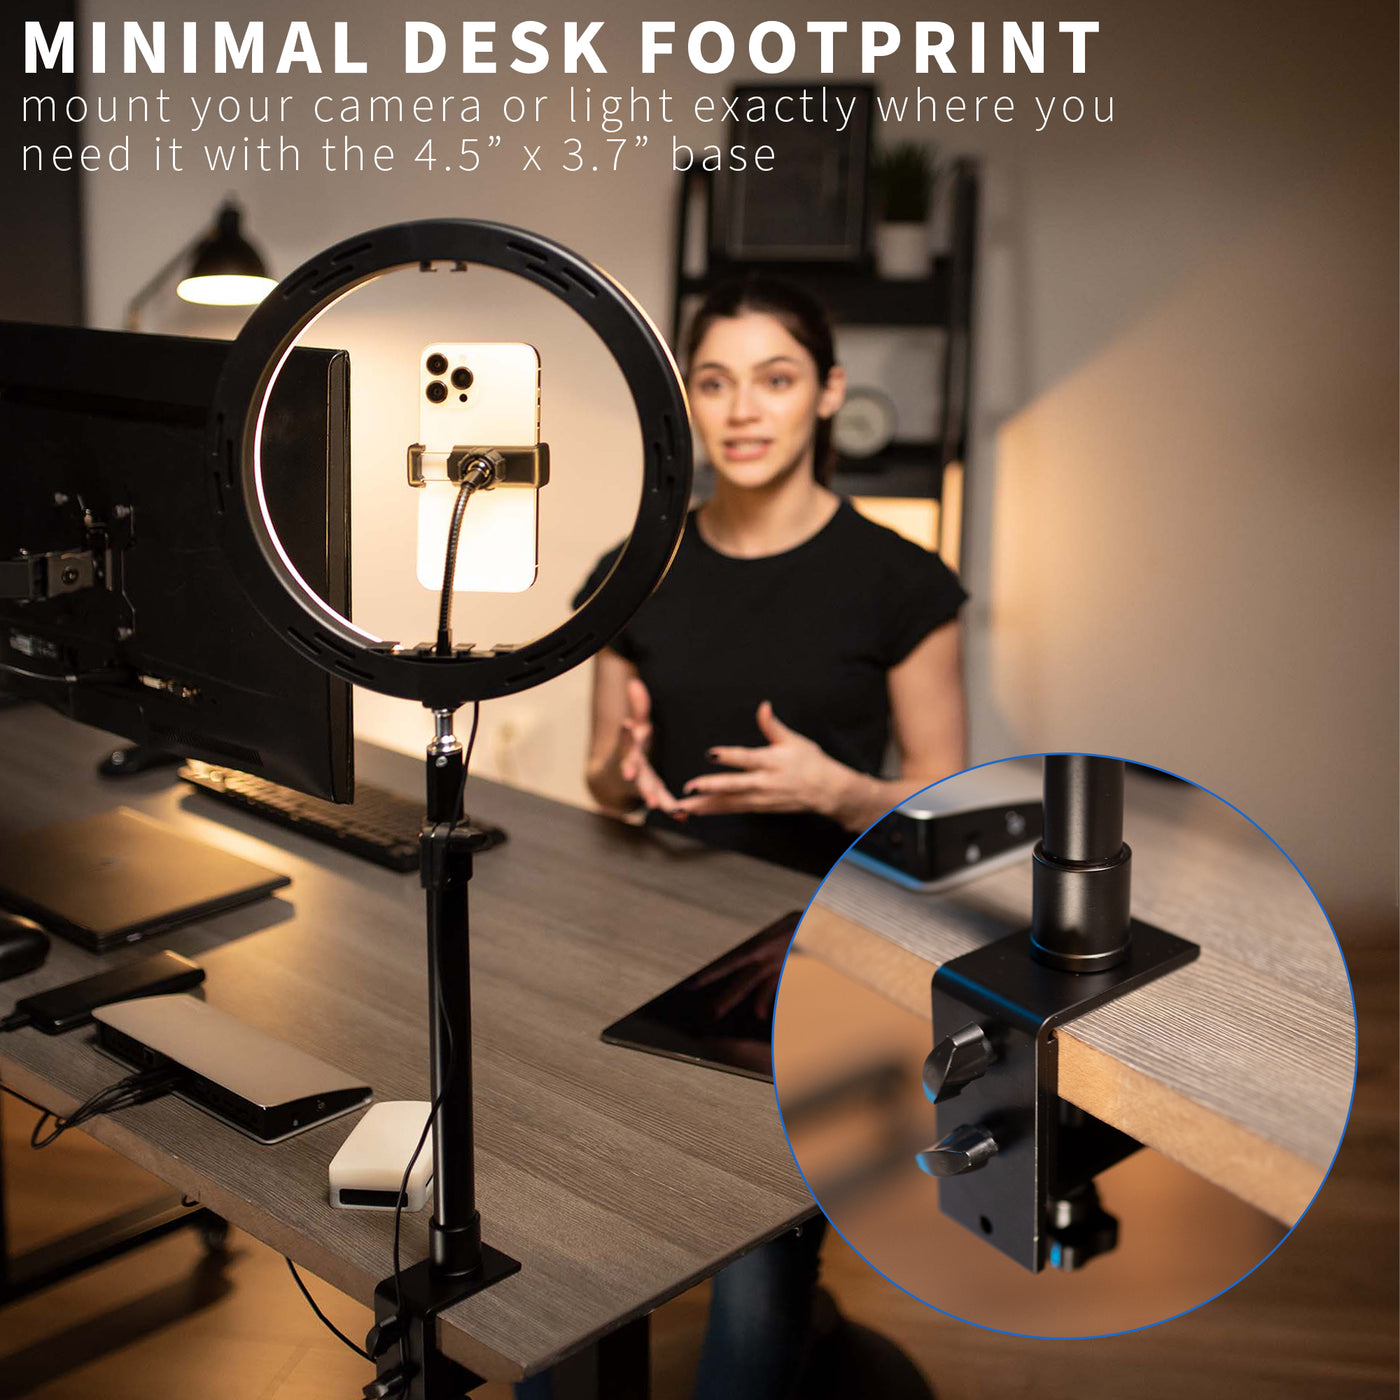 Save desk space with a small footprint mount taking up minimal space.